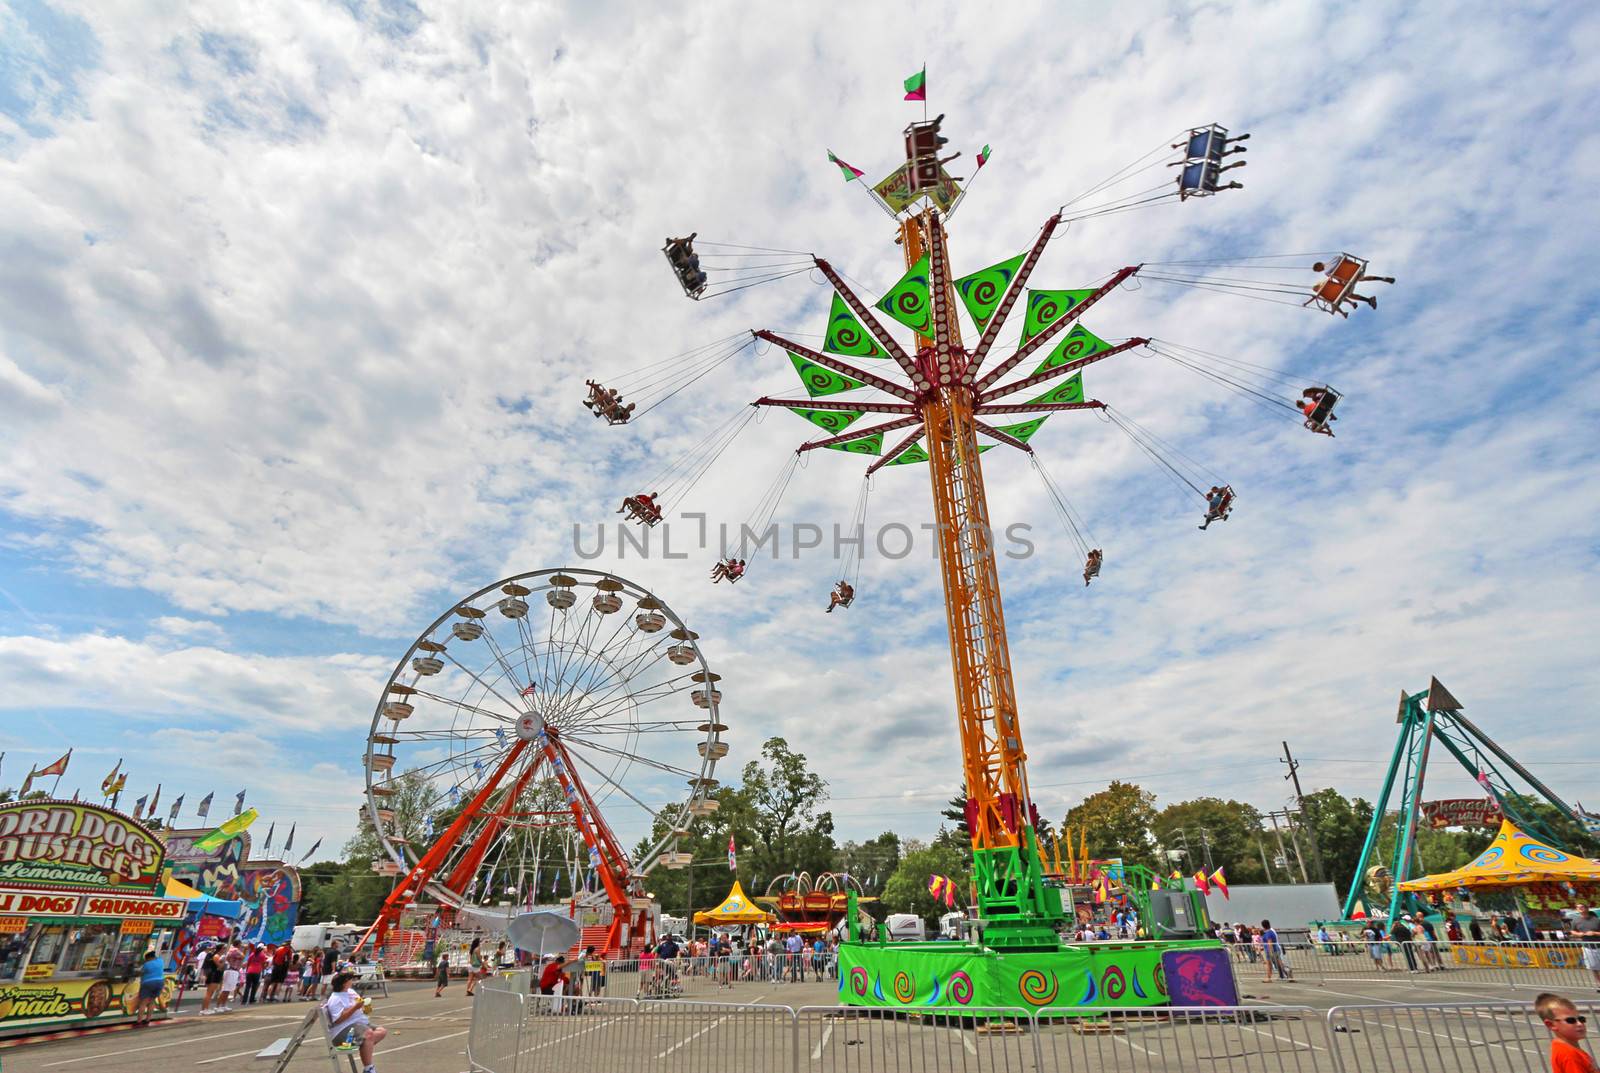 Rides on the Midway at the Indiana State Fair by sgoodwin4813